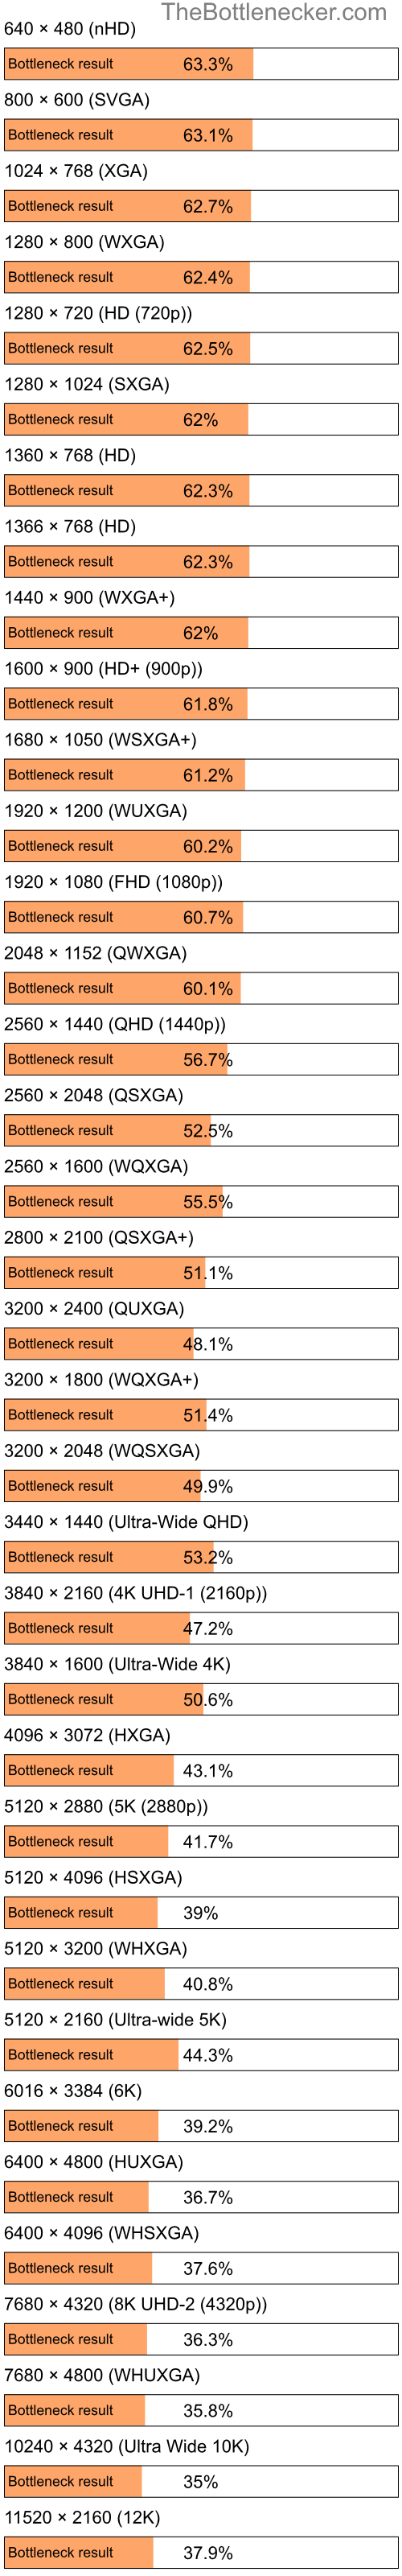 Bottleneck results by resolution for Intel Core i5-6500 and NVIDIA GeForce RTX 3080 Ti in General Tasks